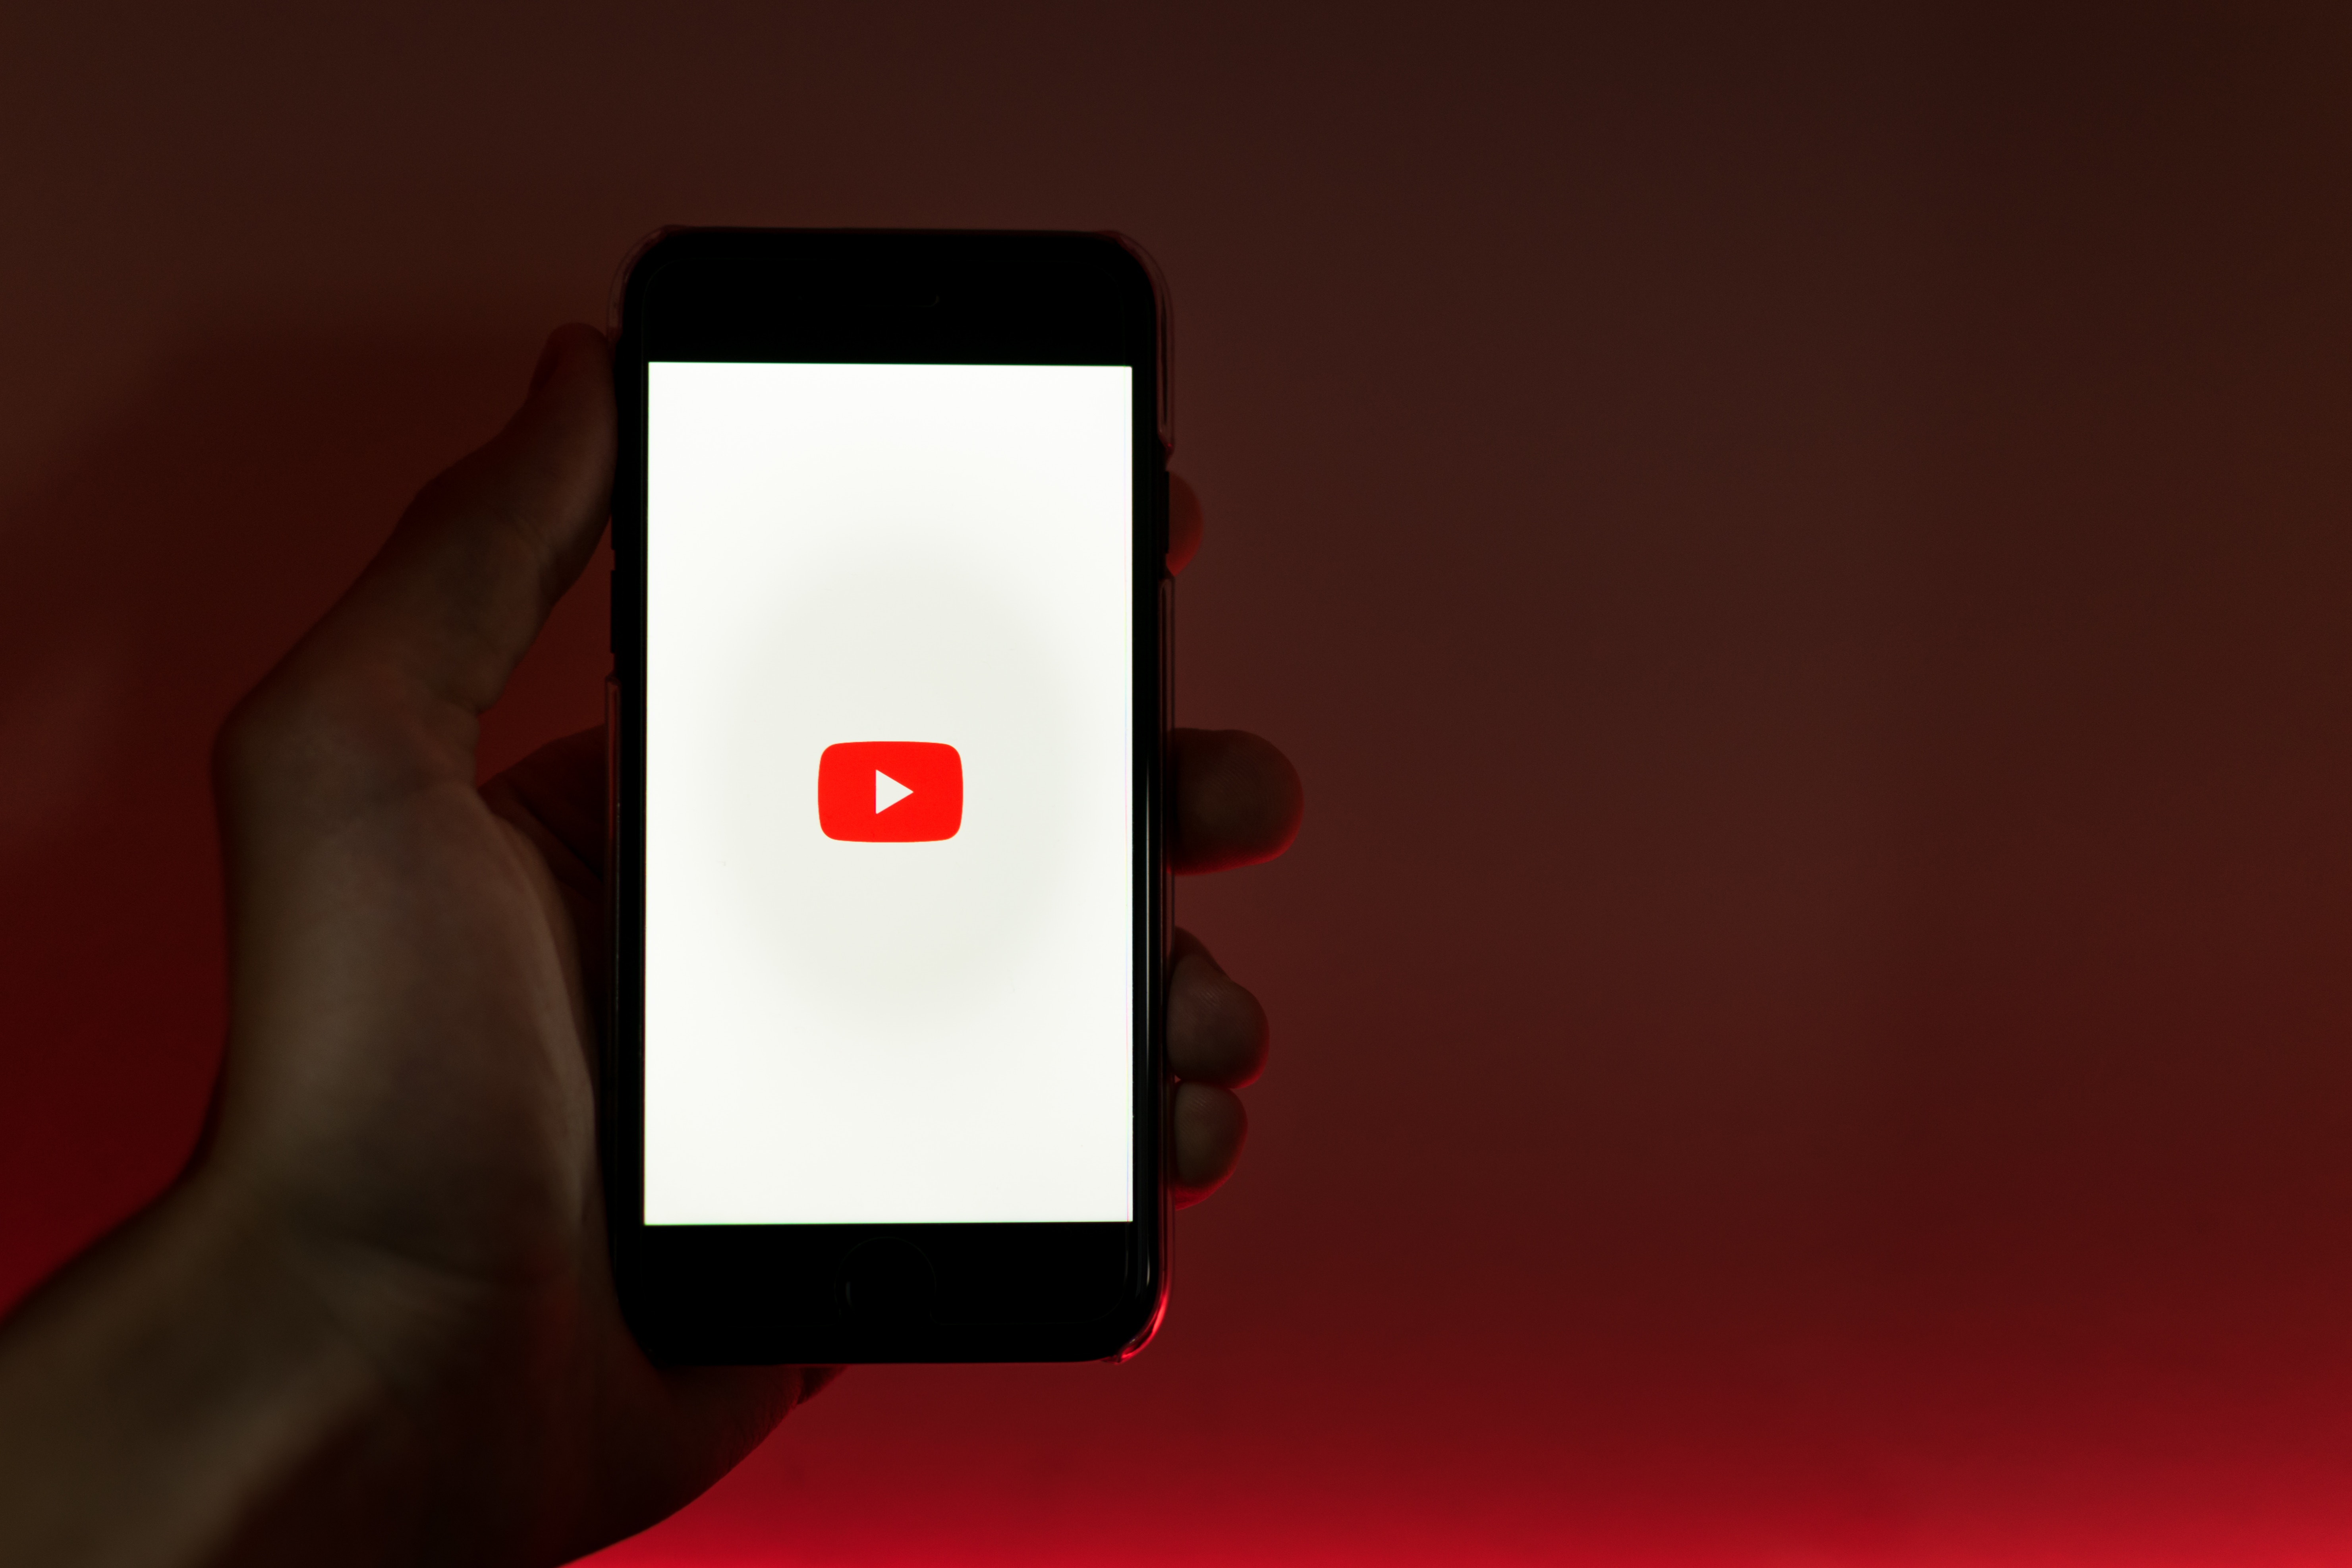 A person displaying a YouTube logo on a smartphone | Photo by Szabo Viktor on Unsplash.